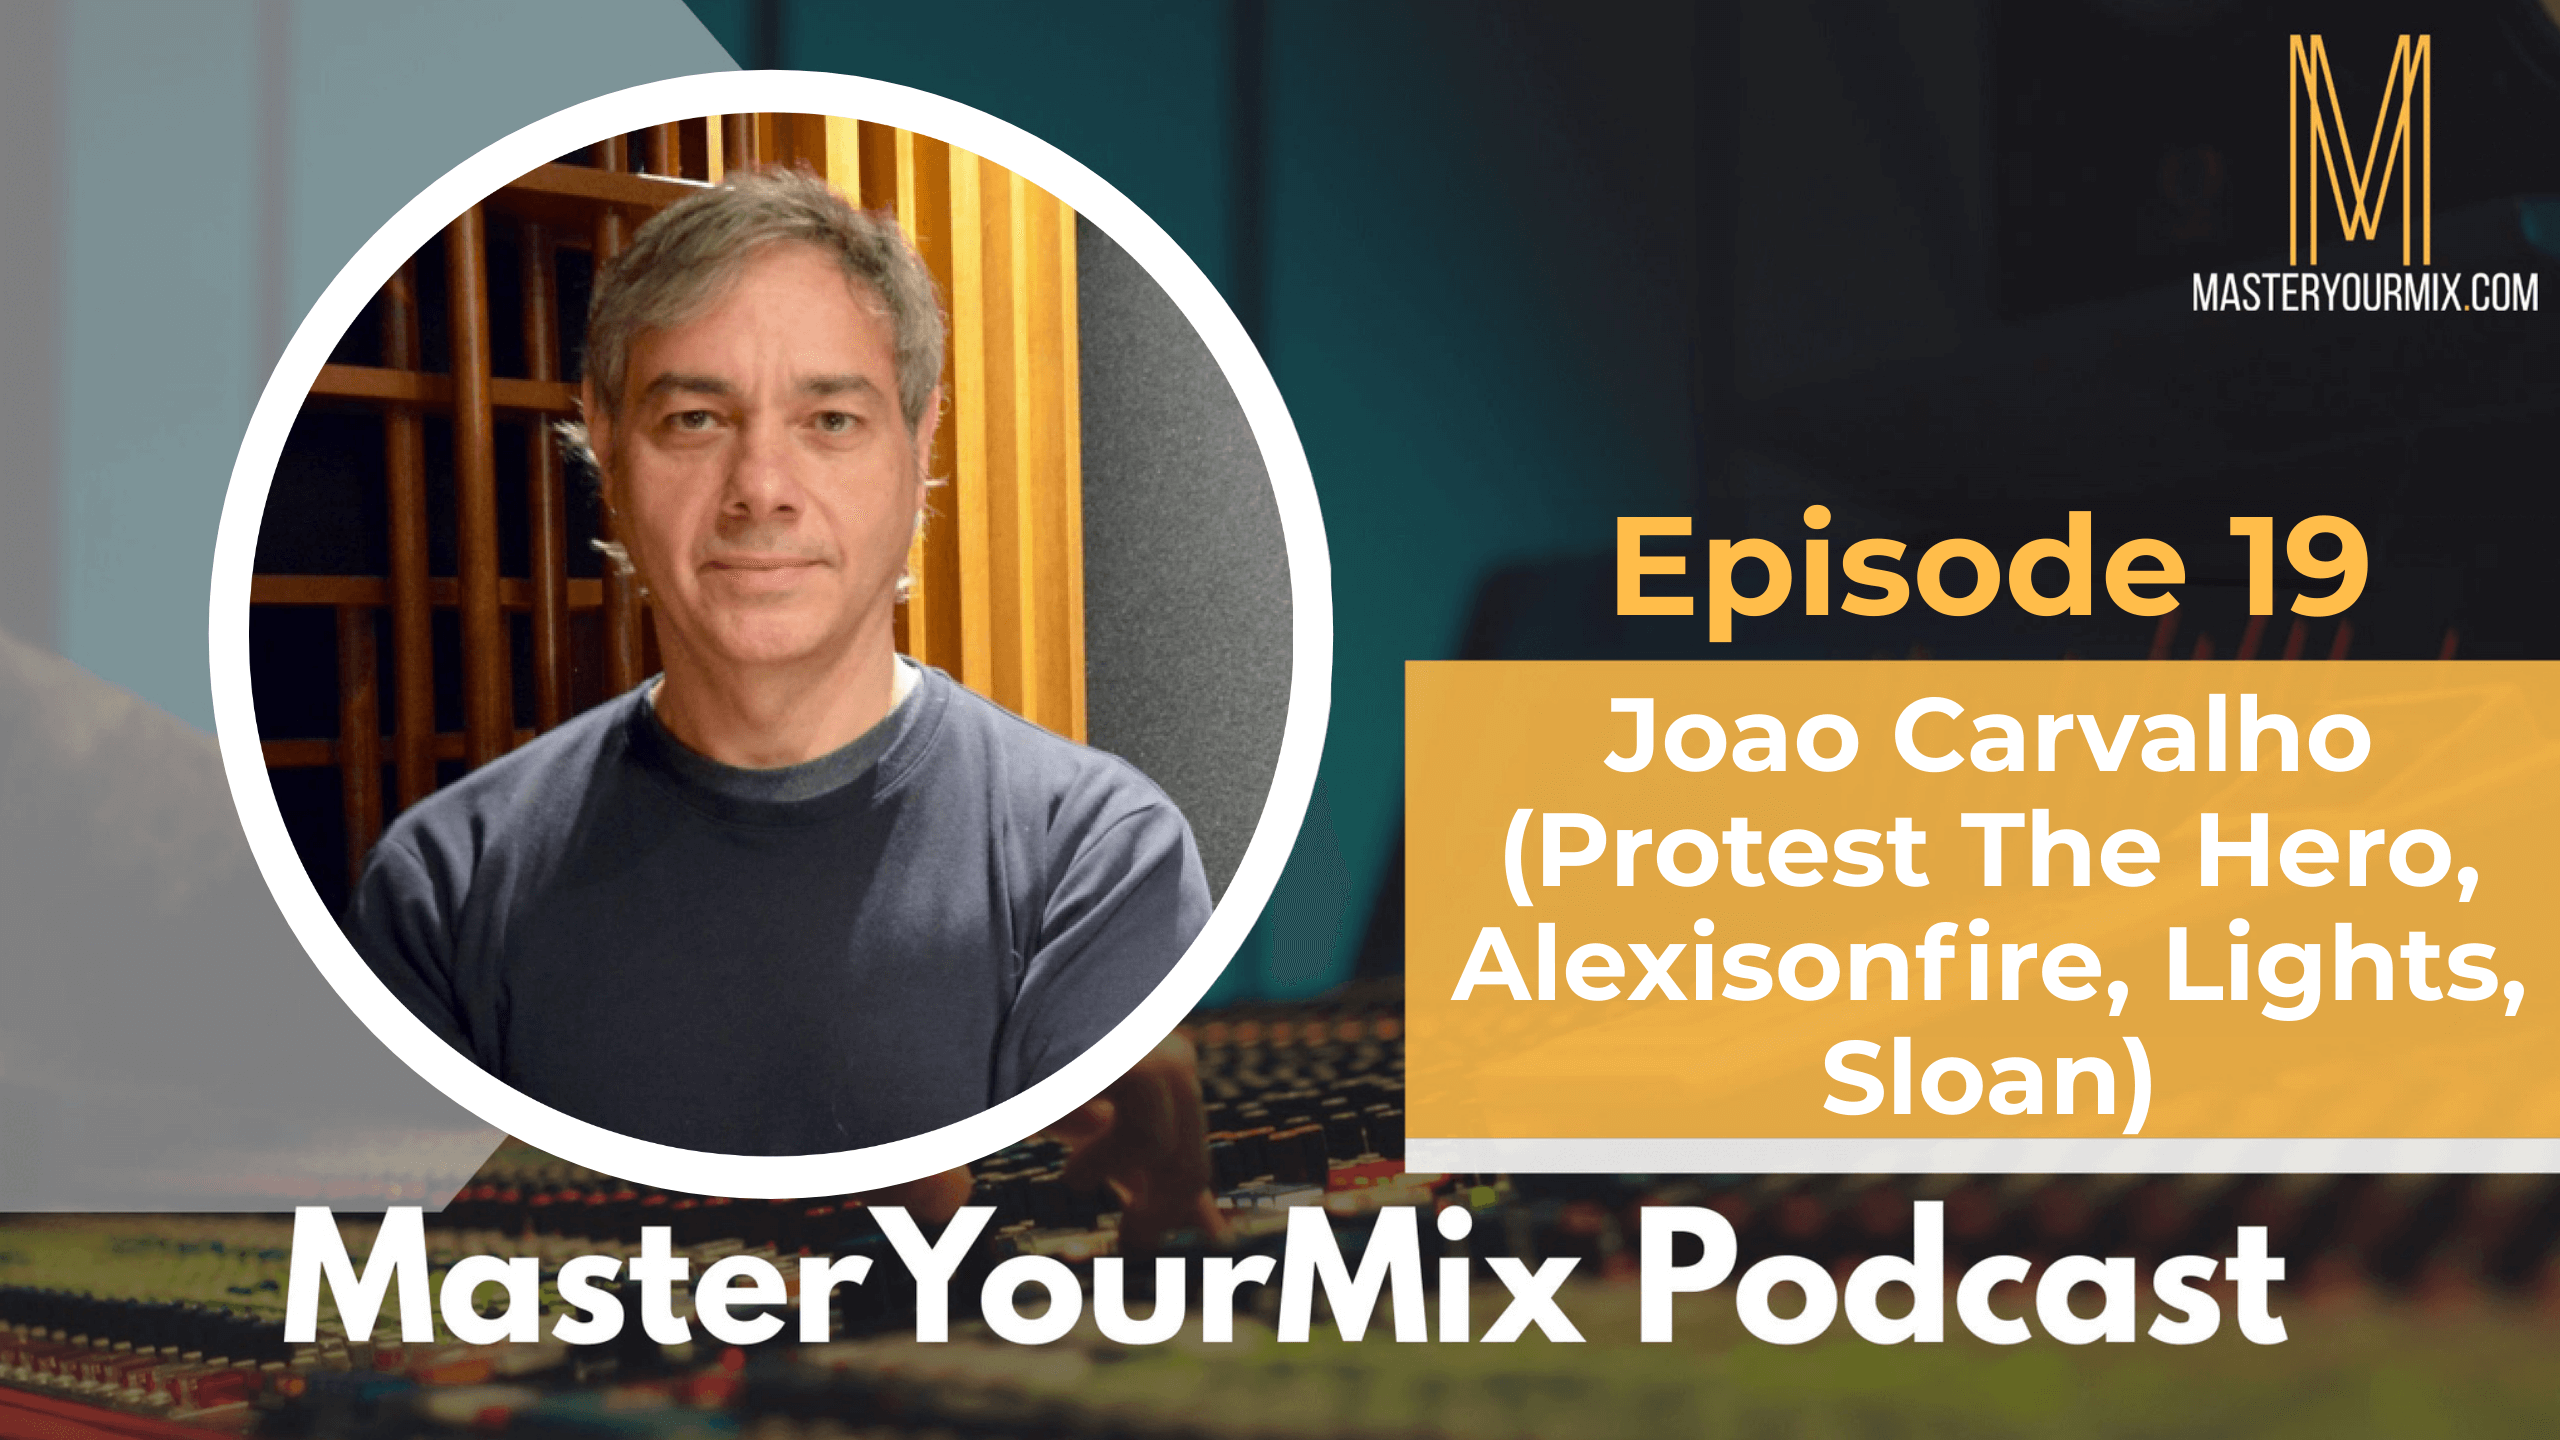 master your mix podcast, ep 19 joao carvalho